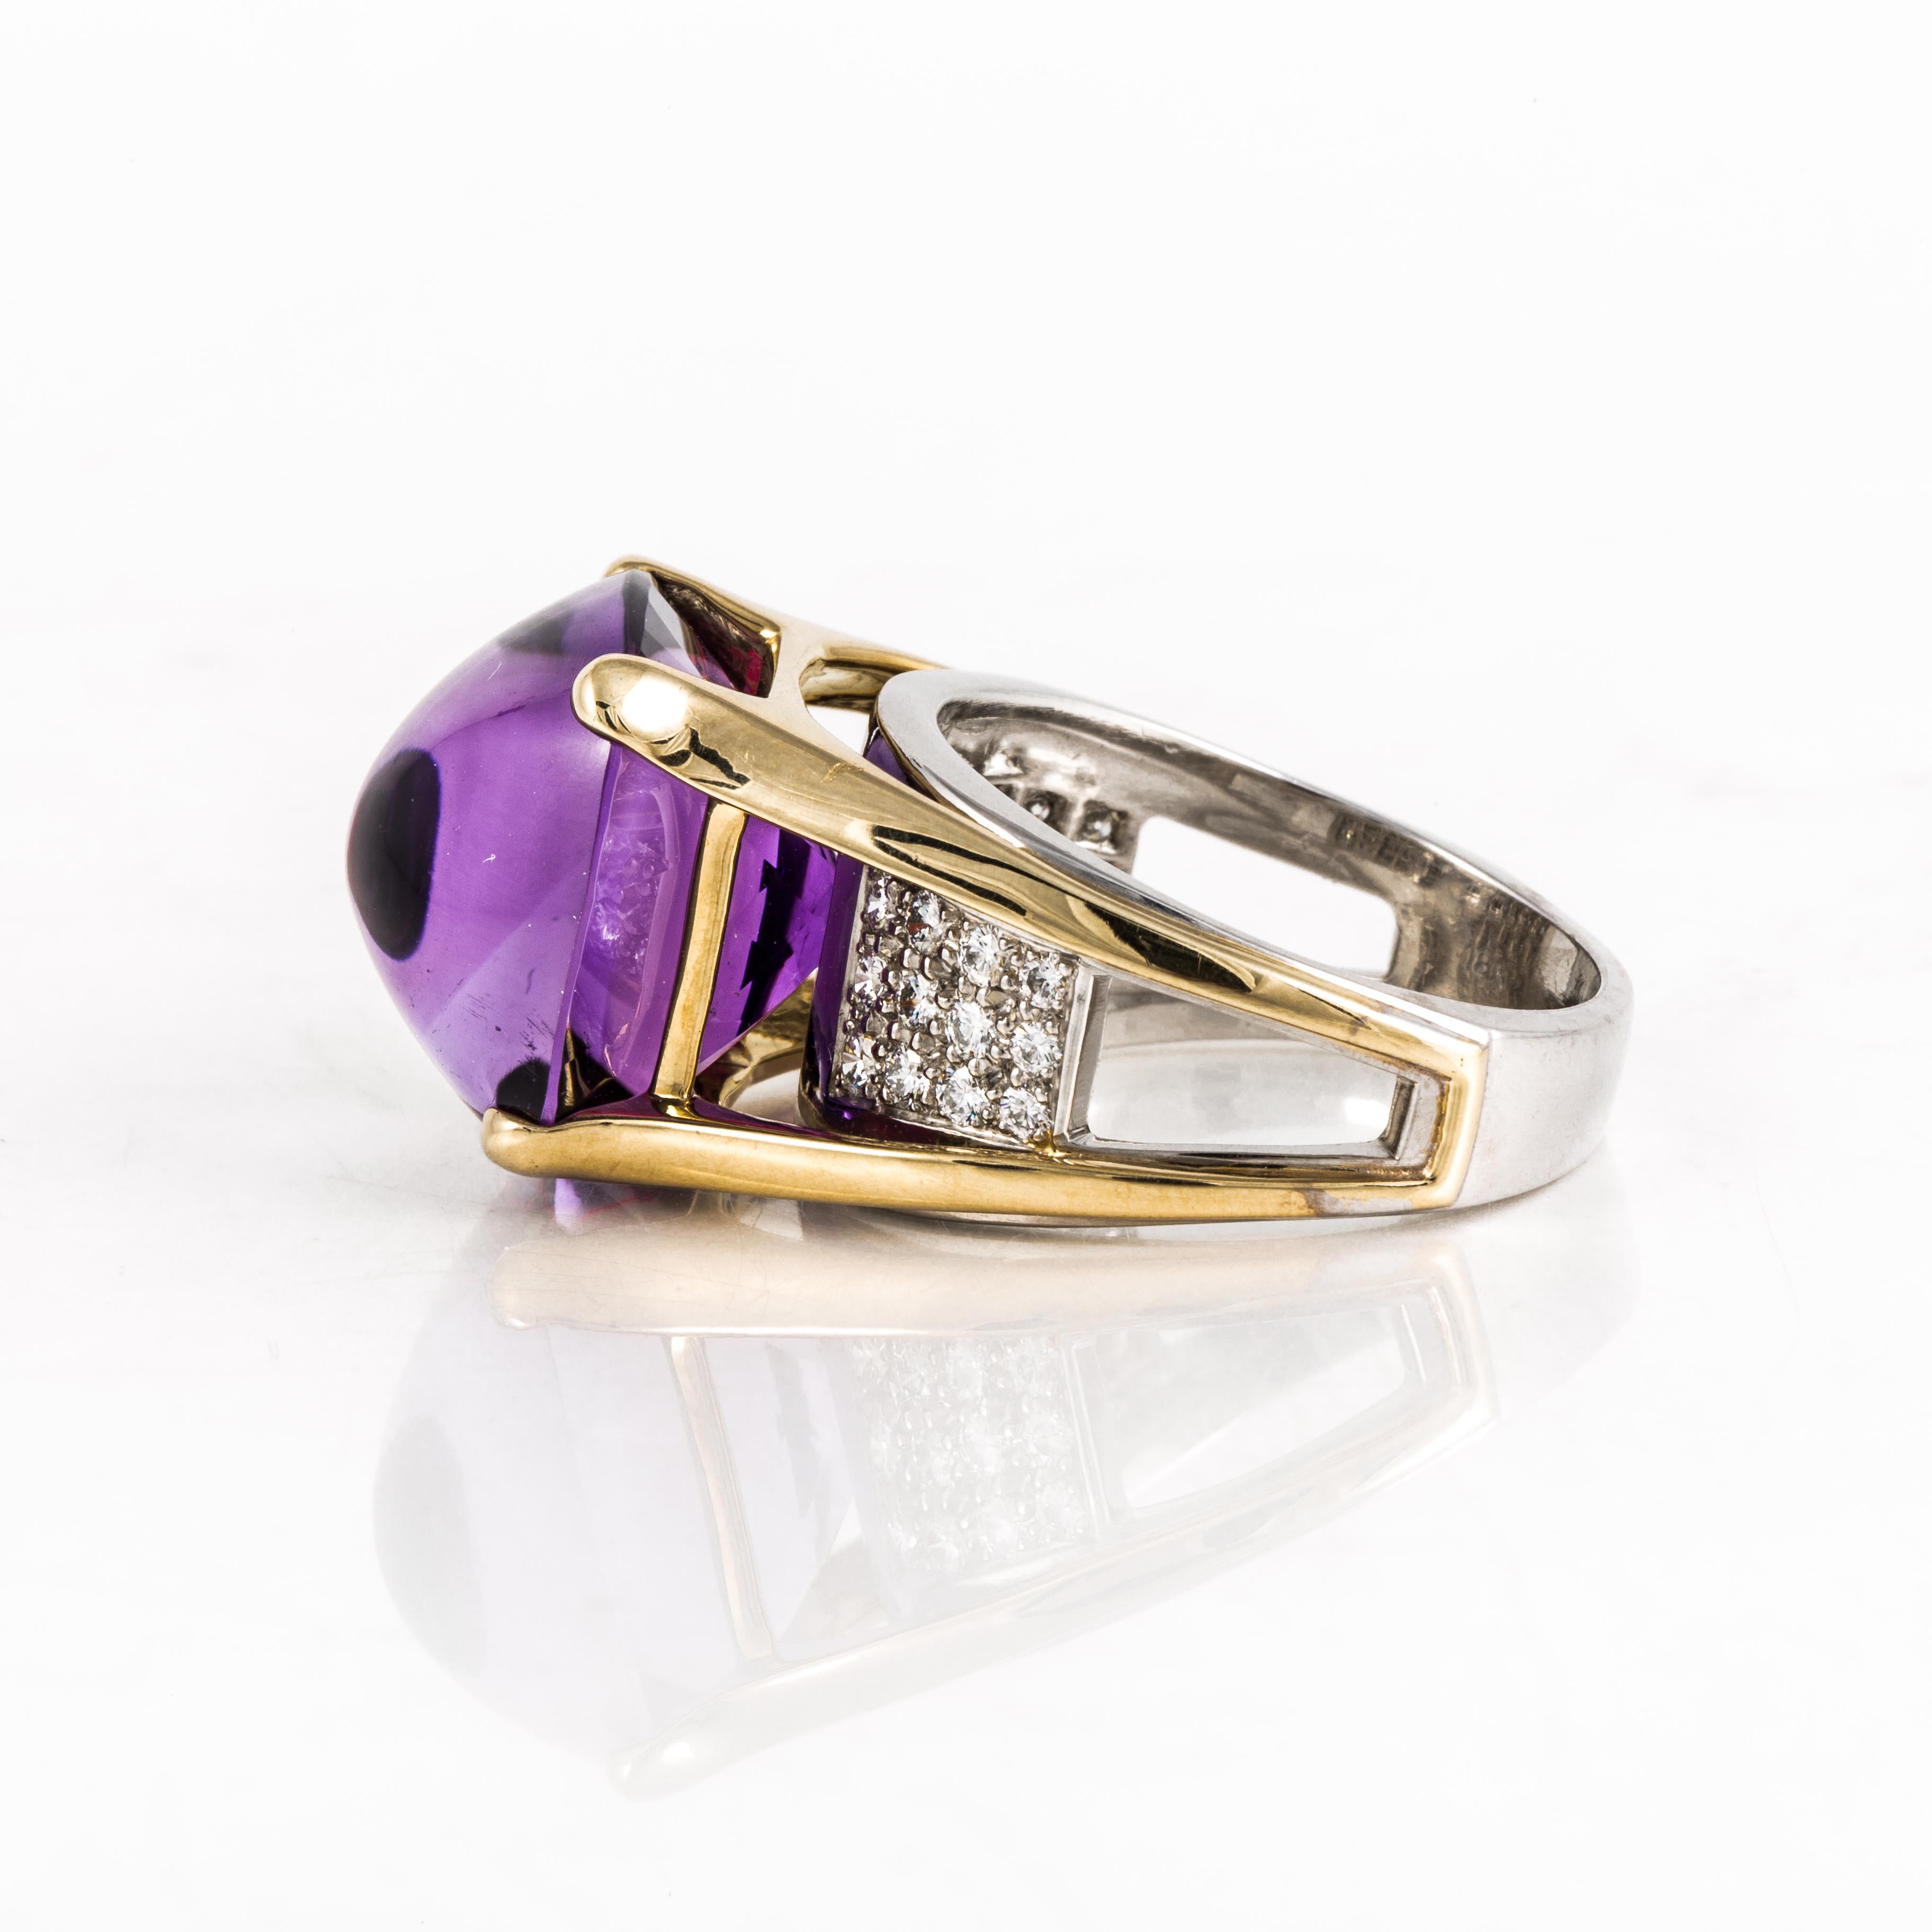 Cabochon Amethyst 18K Gold Ring with Diamonds  In Good Condition For Sale In Houston, TX